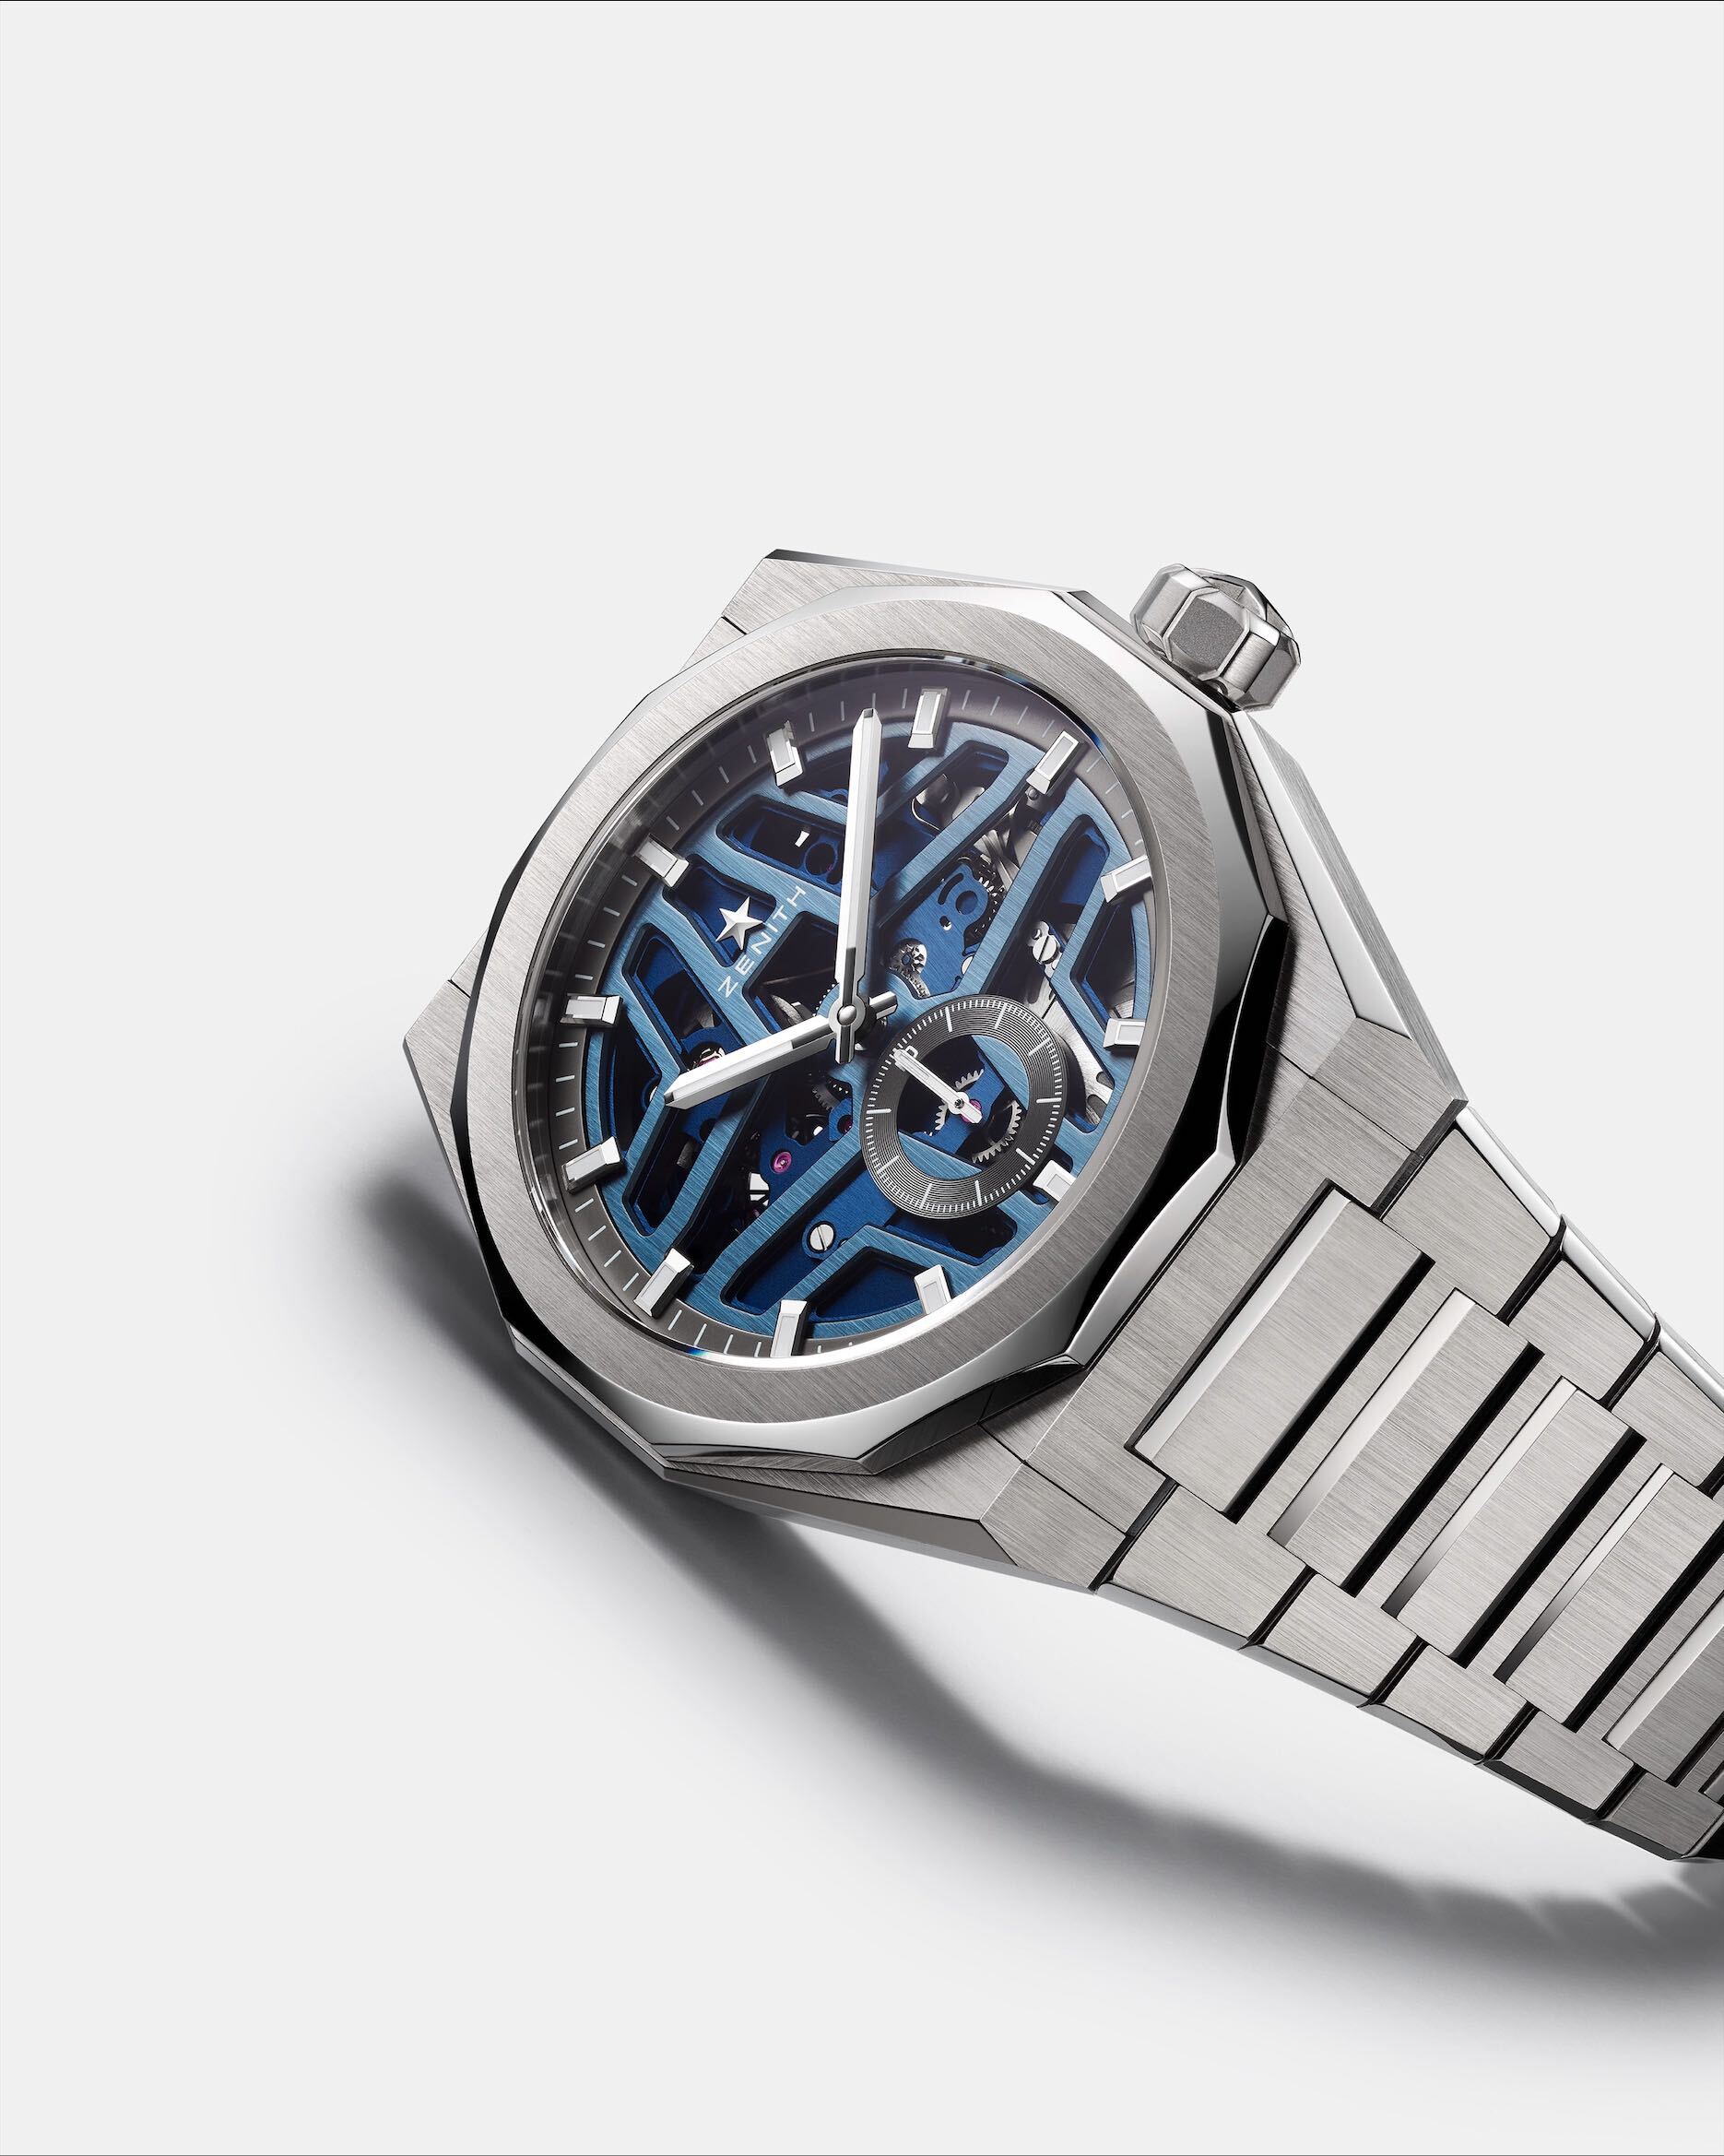 Zenith unveils latest watch to its DEFY collection - Doha News | Qatar